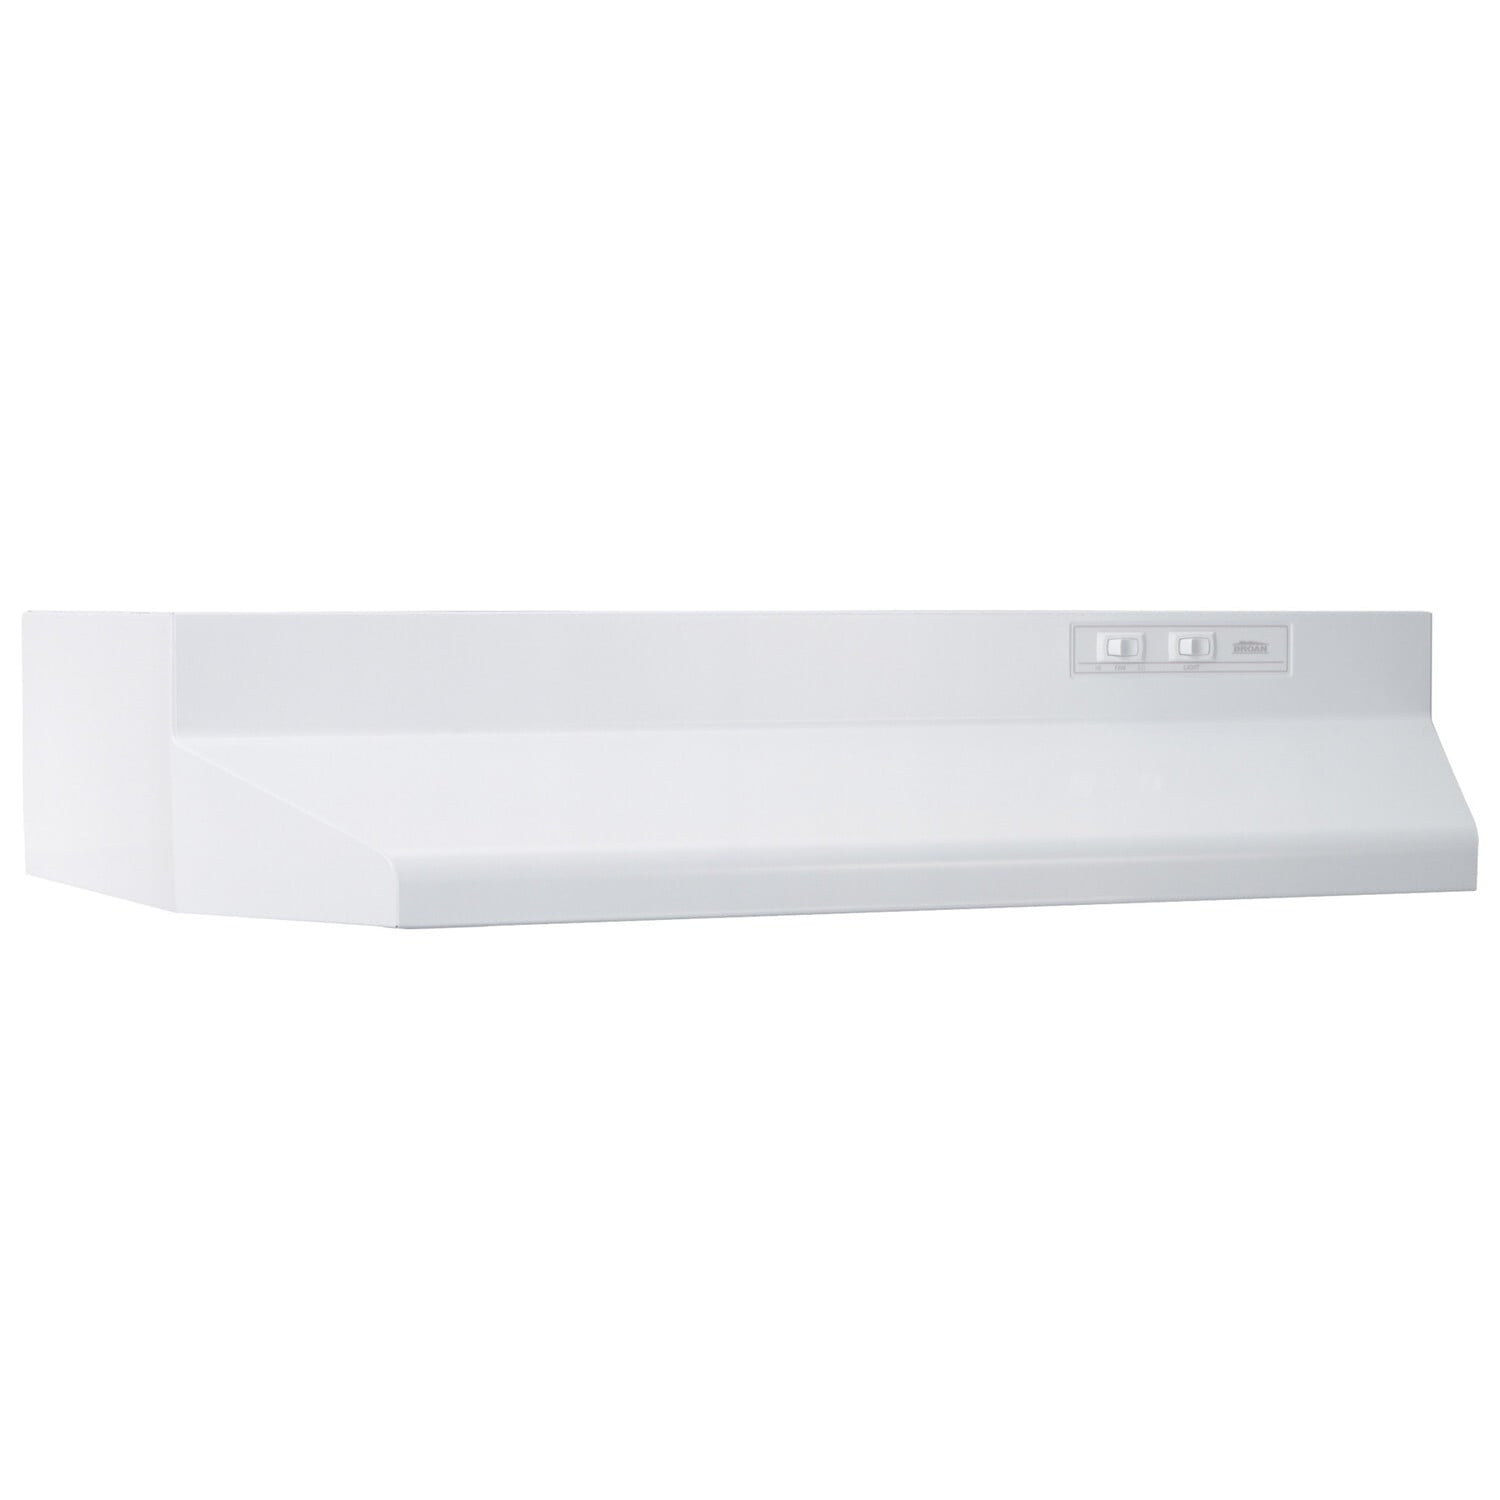 Broan BUEZ024WW Broan® 24-Inch Ducted Under-Cabinet Range Hood W/ Easy Install System, 160 Cfm, White